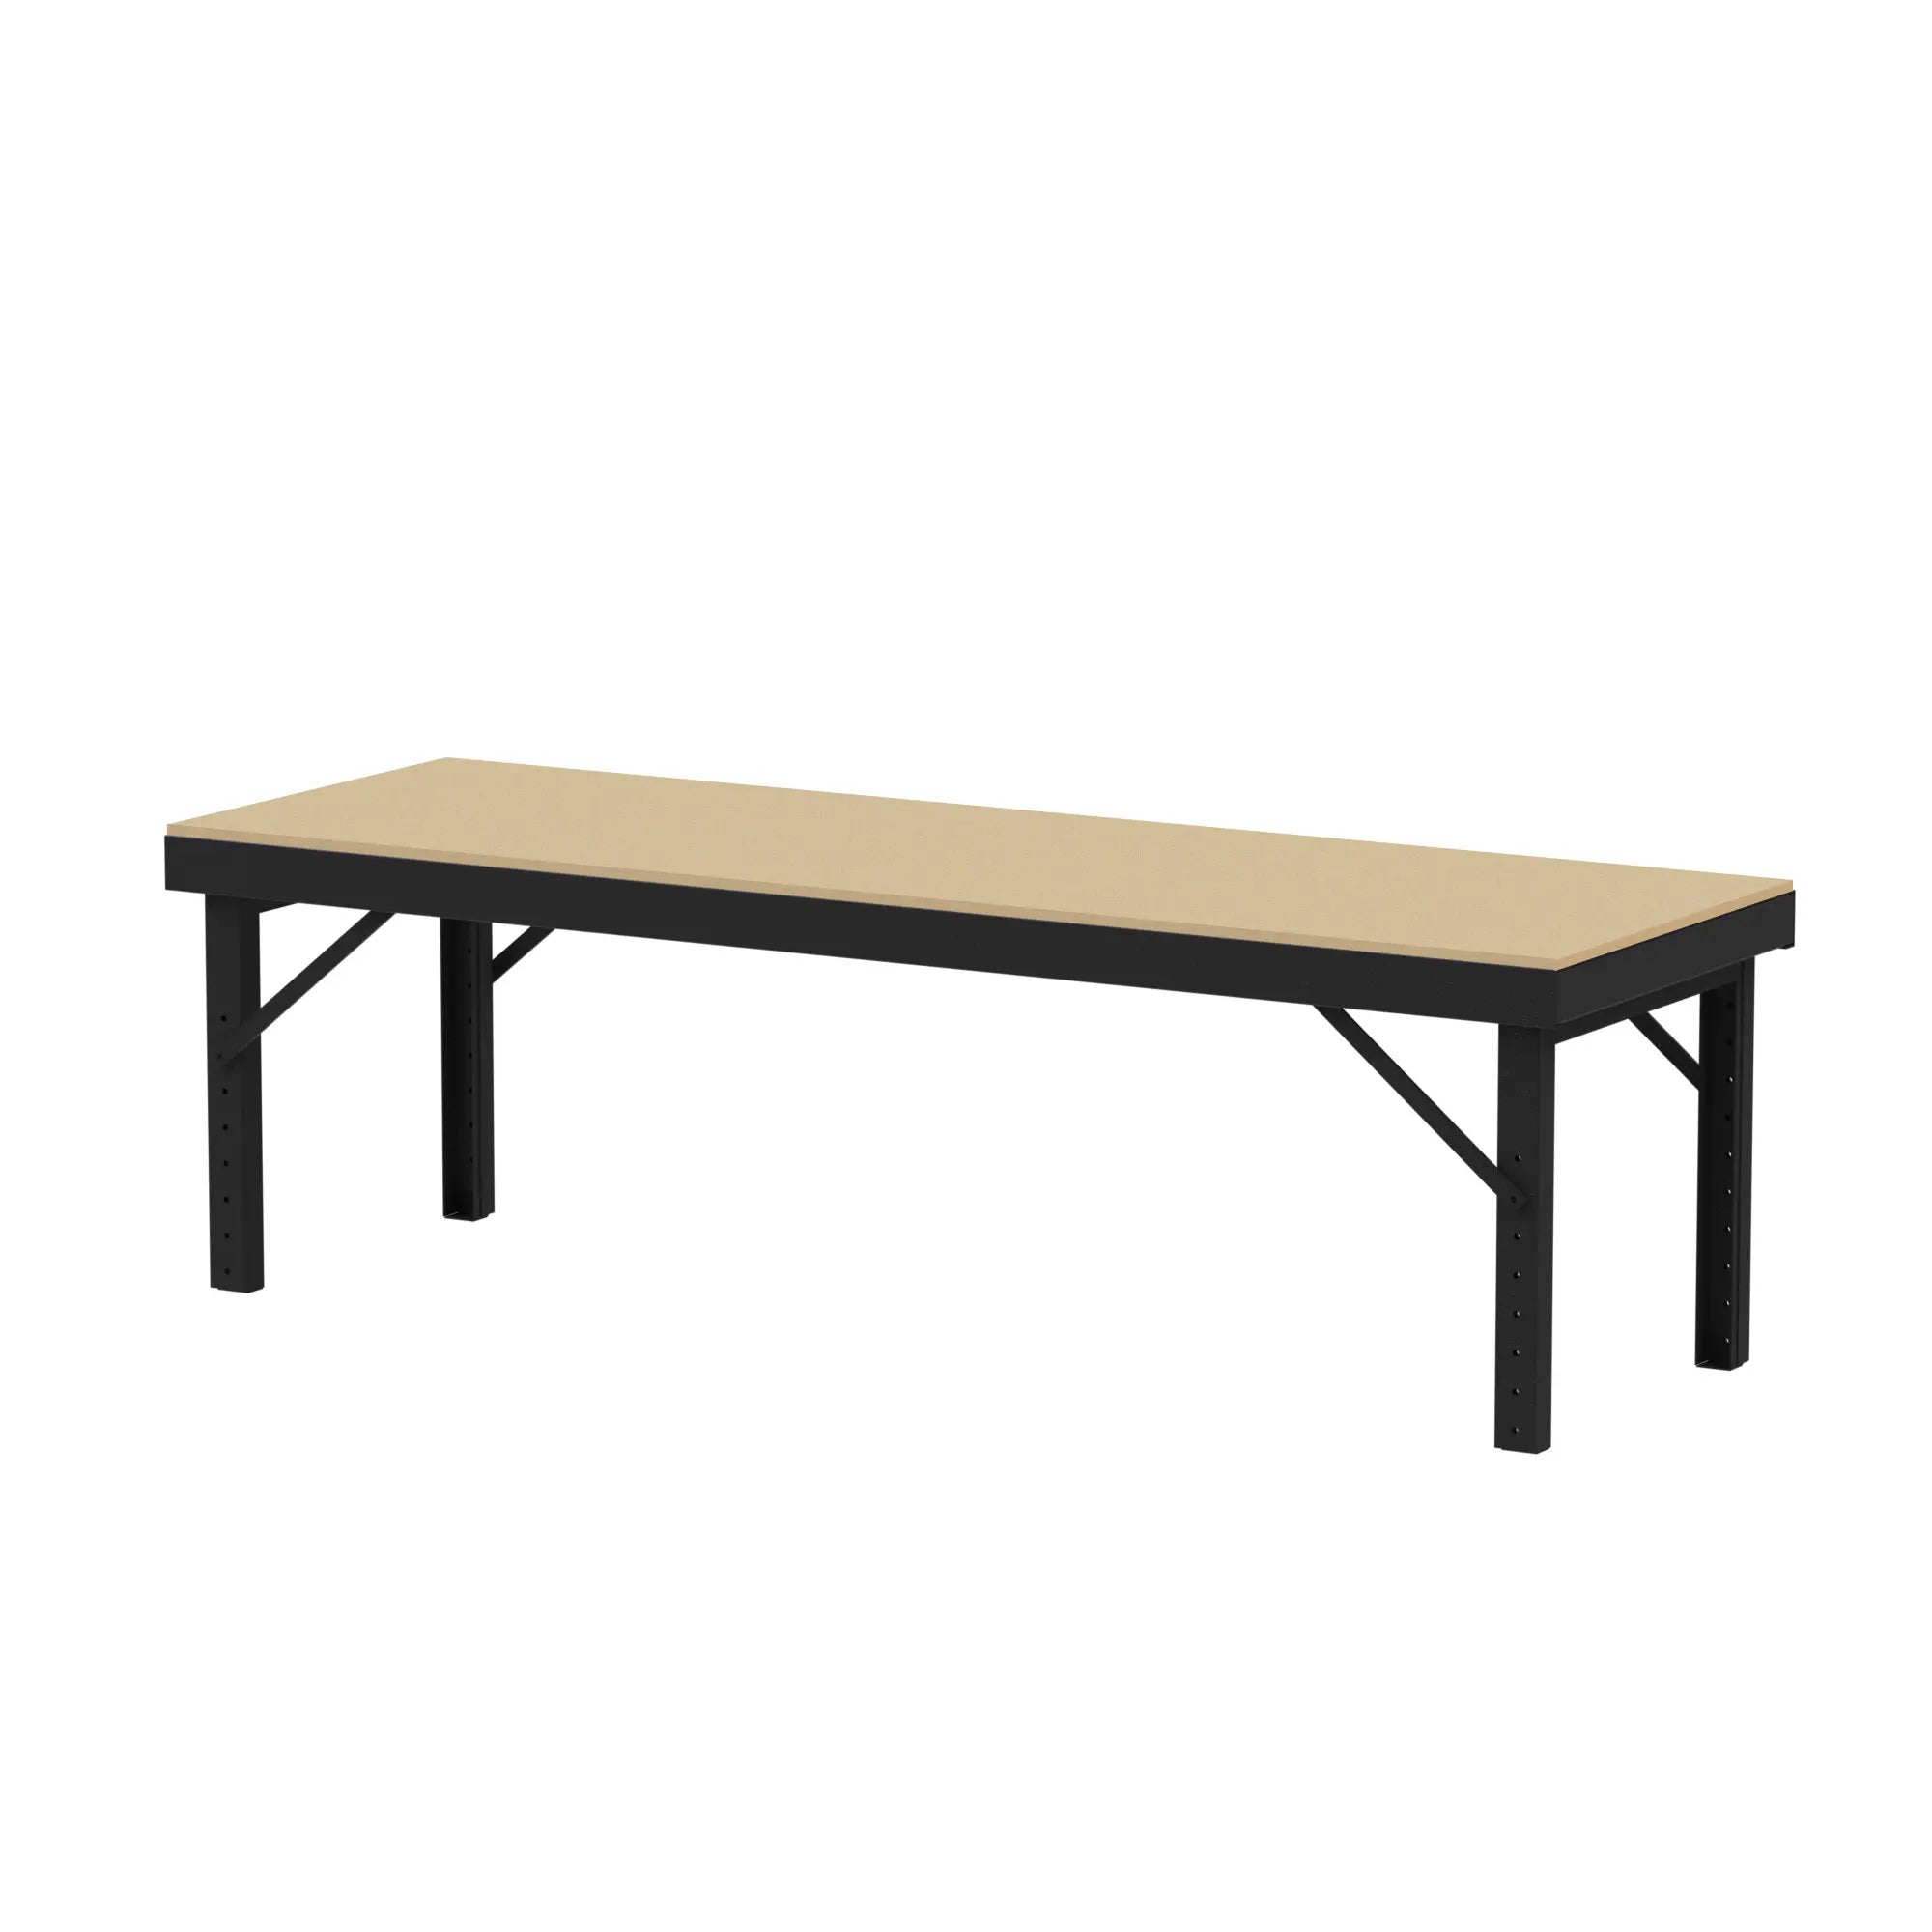 Valley Craft Adjustable Height Work Tables - Warehouse Gear Hub 